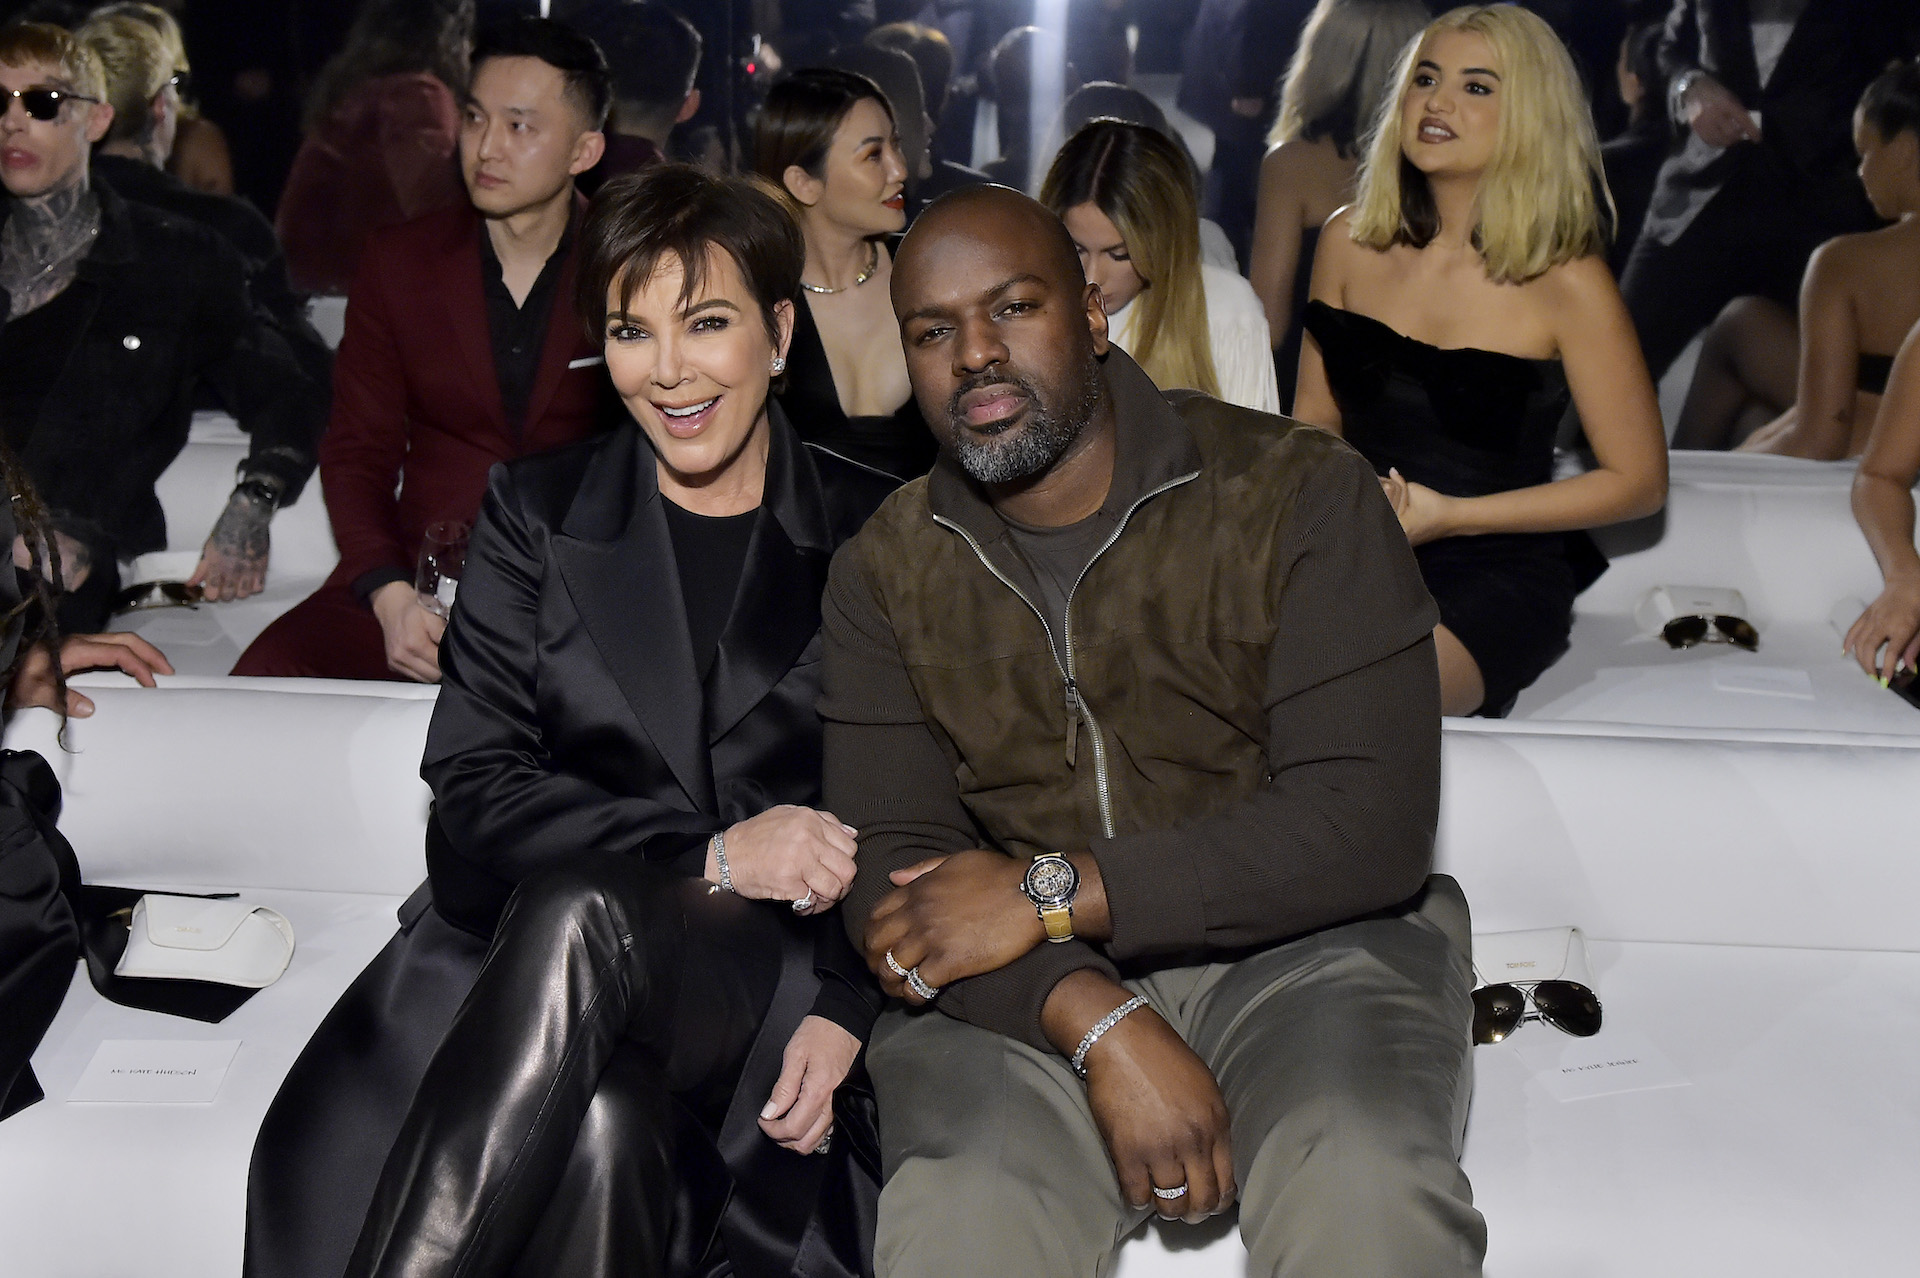 LOS ANGELES, CALIFORNIA - FEBRUARY 07: Kris Jenner and Corey Gamble attend Tom Ford: Autumn/Winter 2020 Runway Show at Milk Studios on February 07, 2020 in Los Angeles, California. (Photo by Stefanie Keenan/Getty Images for TOM FORD: AUTUMN/WINTER 2020 RUNWAY SHOW )